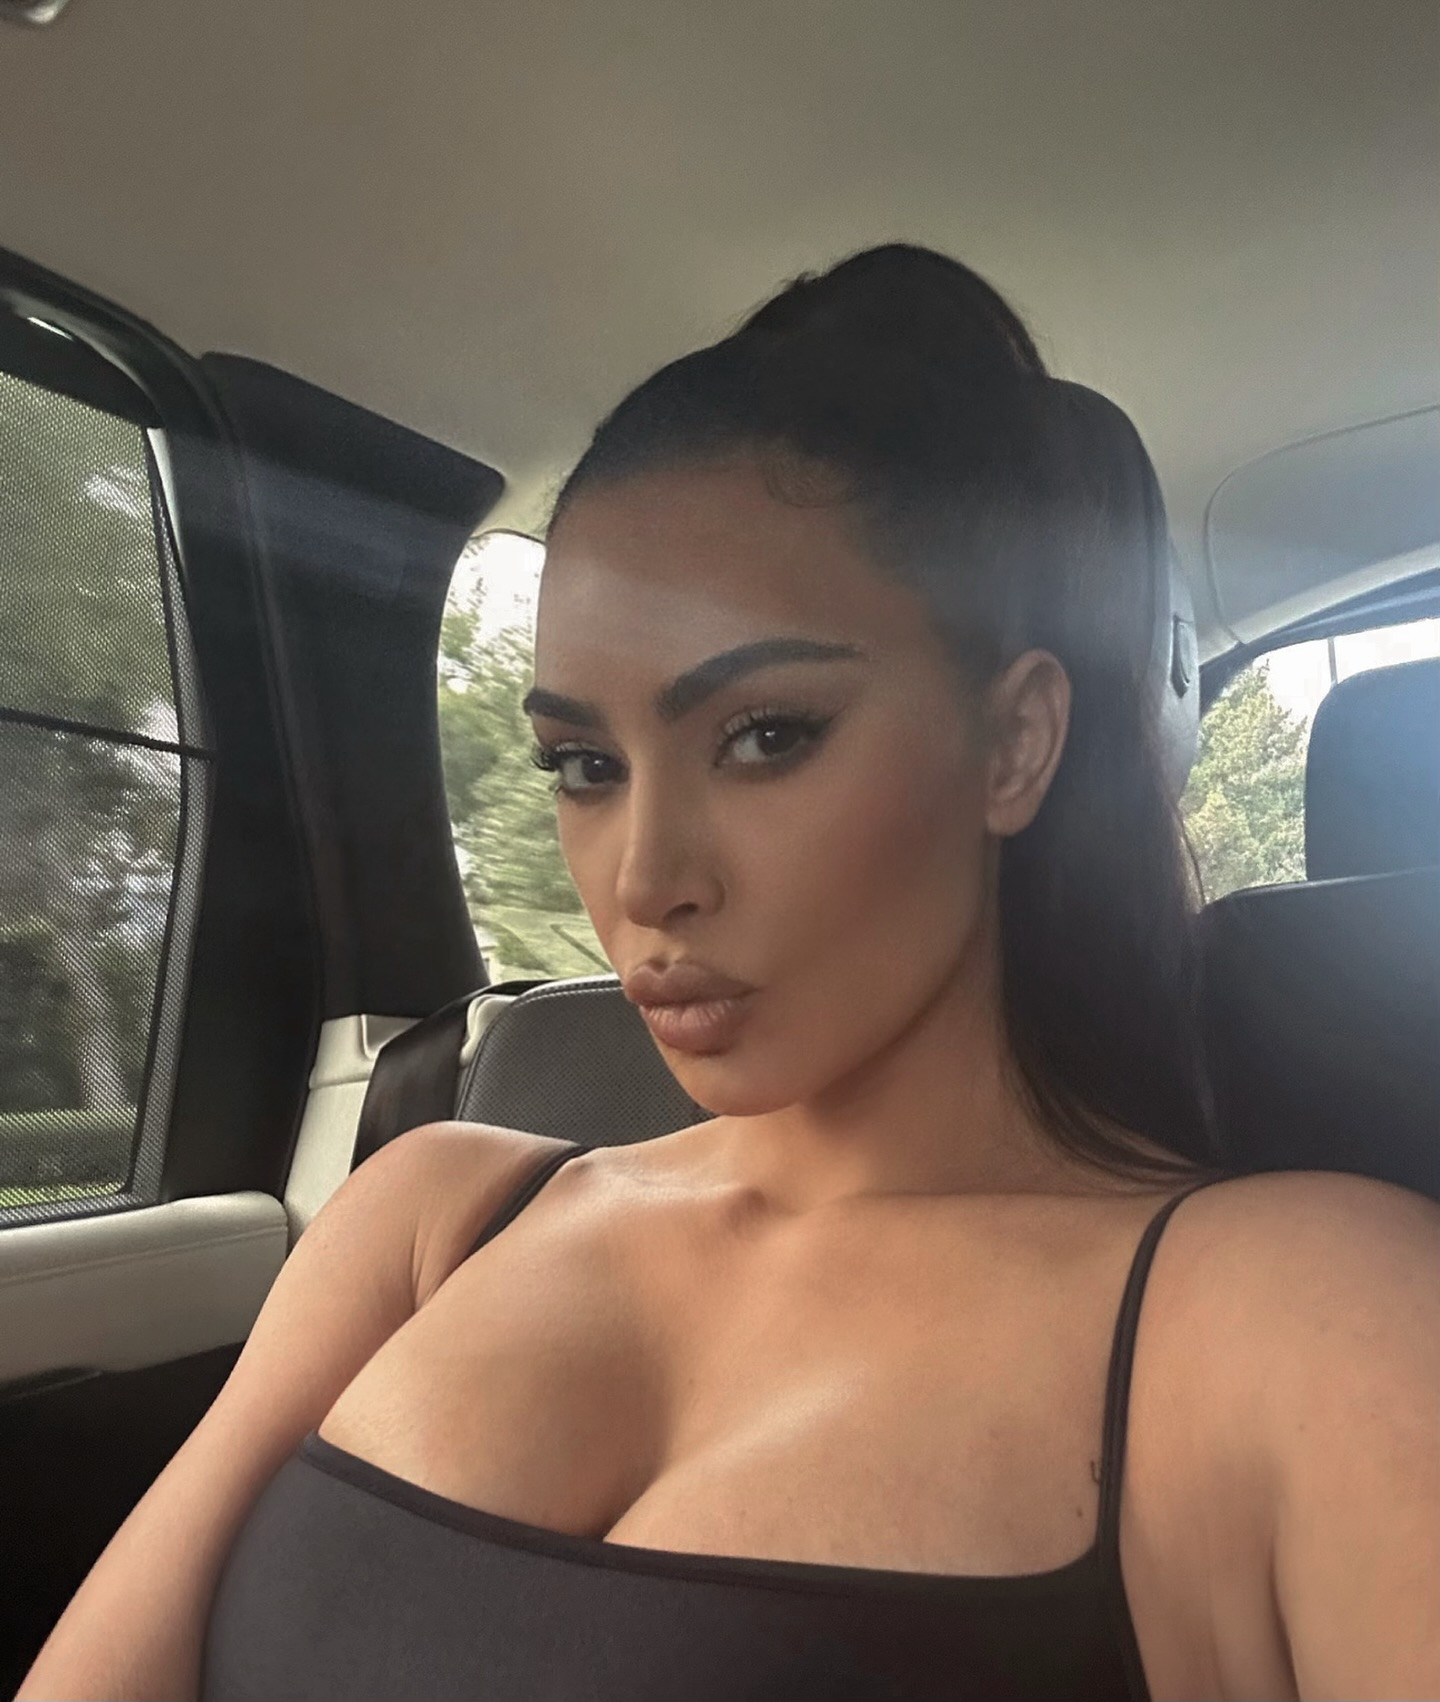 Kim nearly popped out of her tank top in the car selfie she posted on Instagram